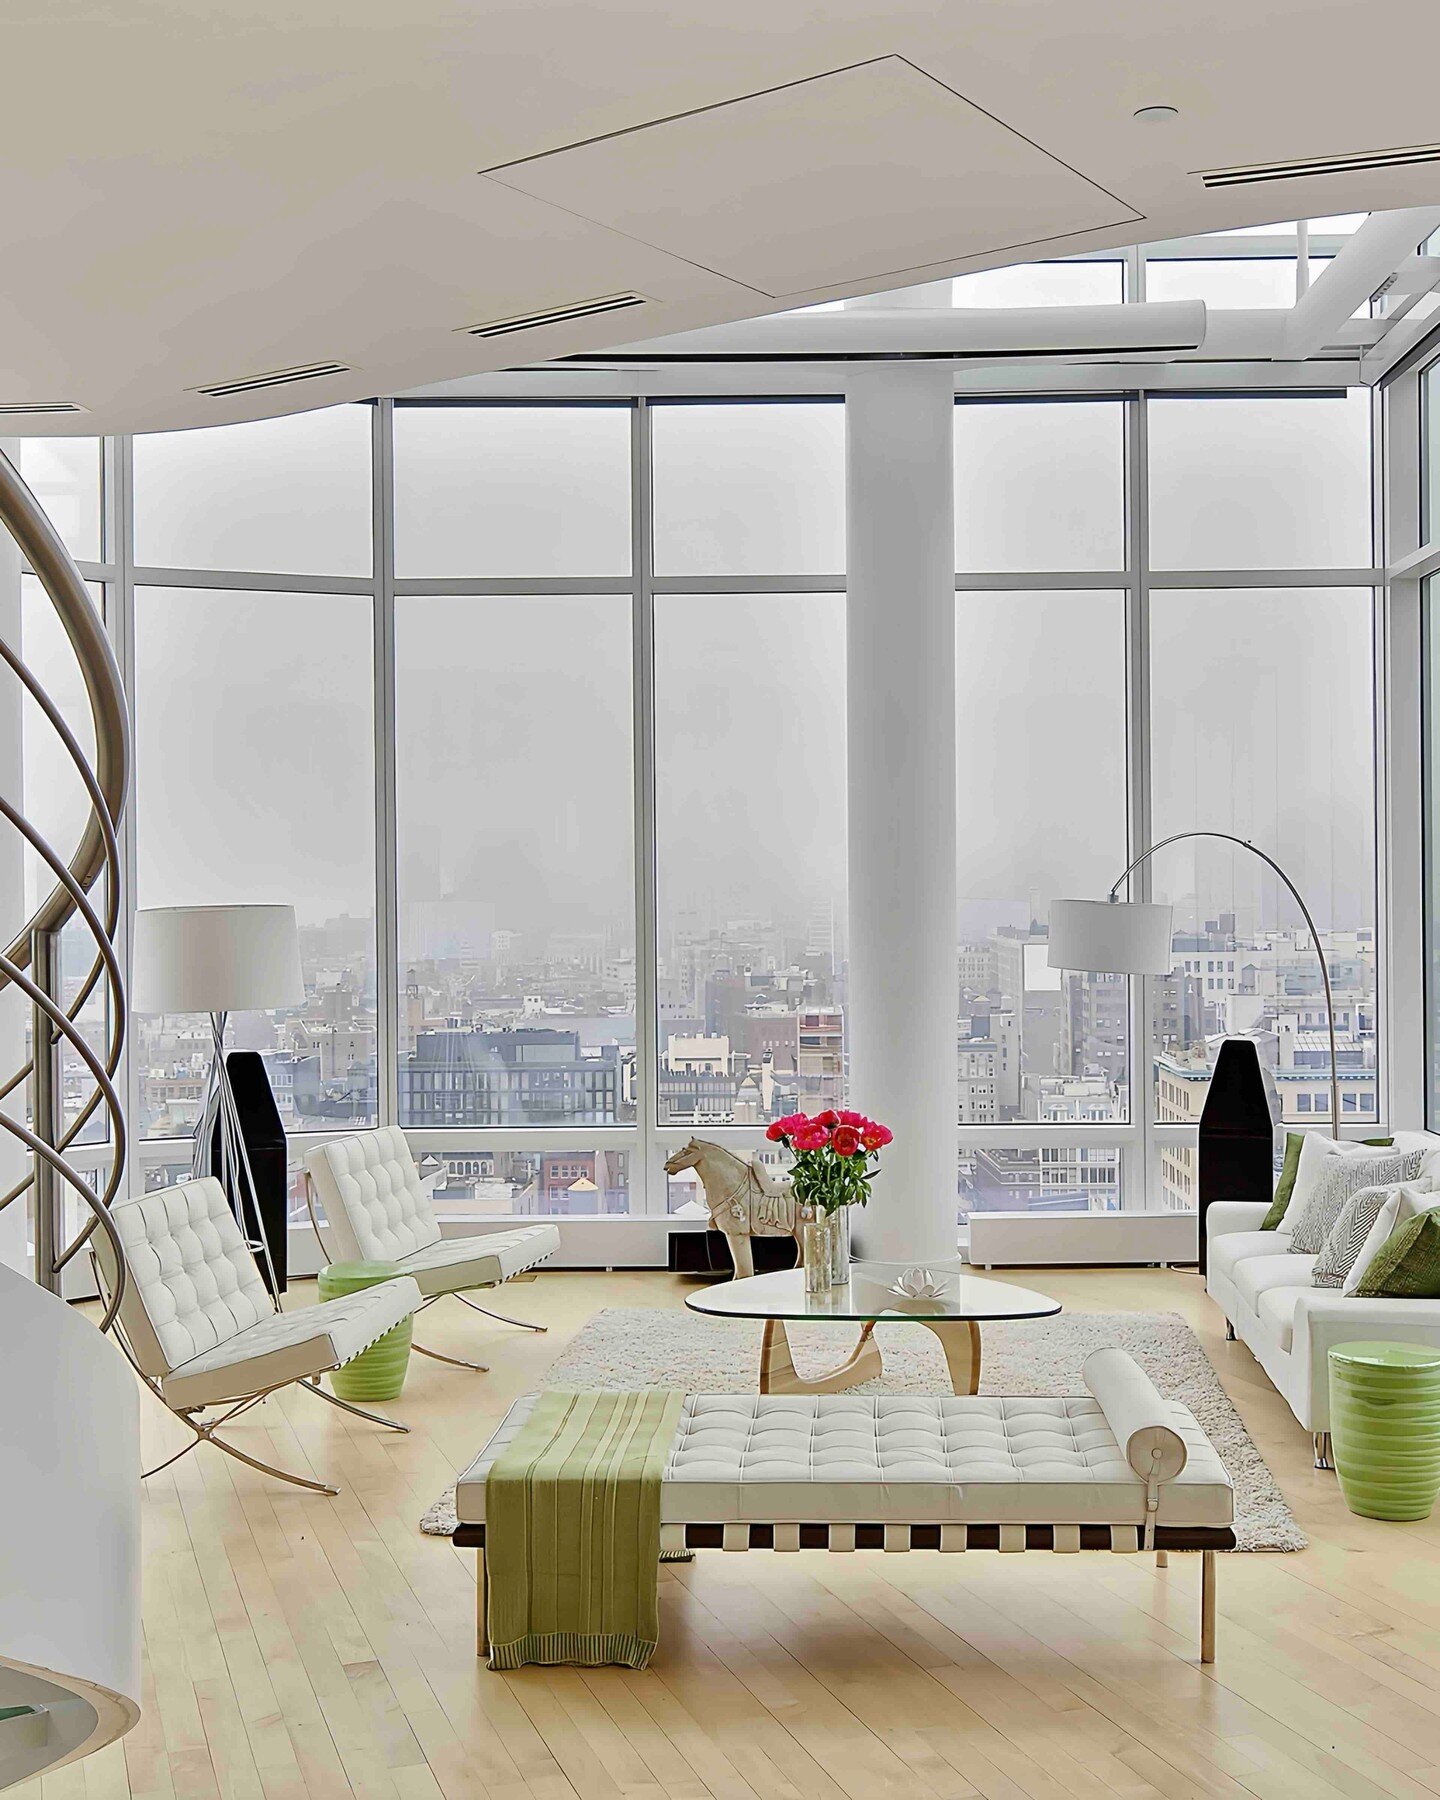 Marie Burgos Design presents a Chelsea penthouse where modern elegance meets comfort. The interior pairs monochromatic schemes with color splashes, creating a sophisticated urban retreat.

#InteriorDesign #ModernLuxury #ChelseaLiving #MarieBurgosDesi